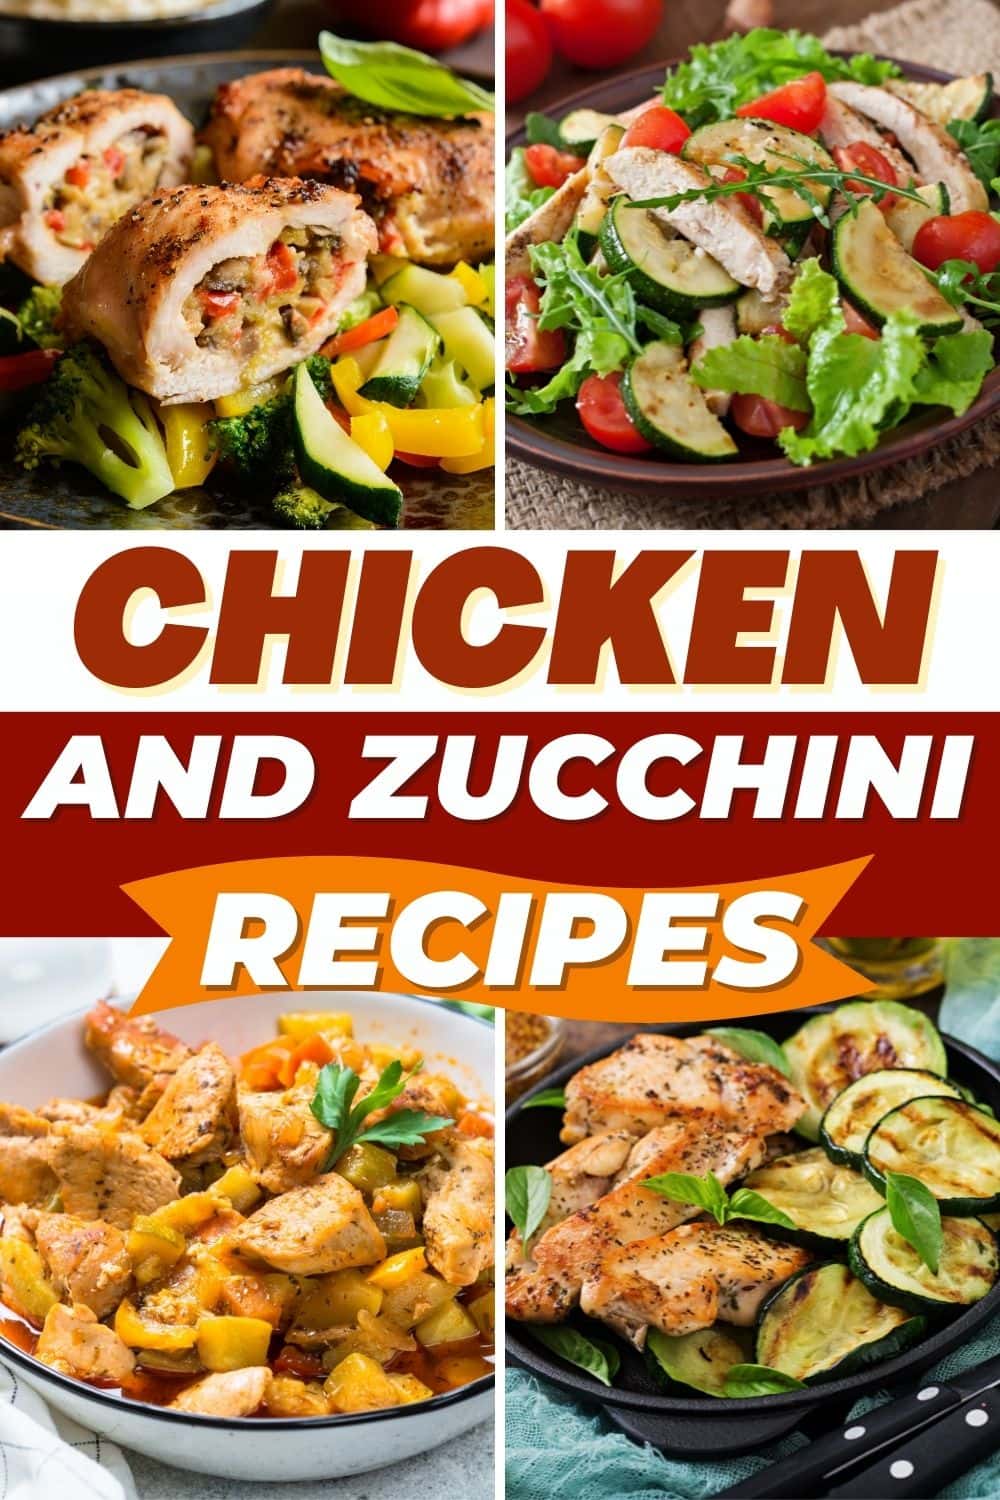 23 Chicken and Zucchini Recipes for Dinner - Insanely Good